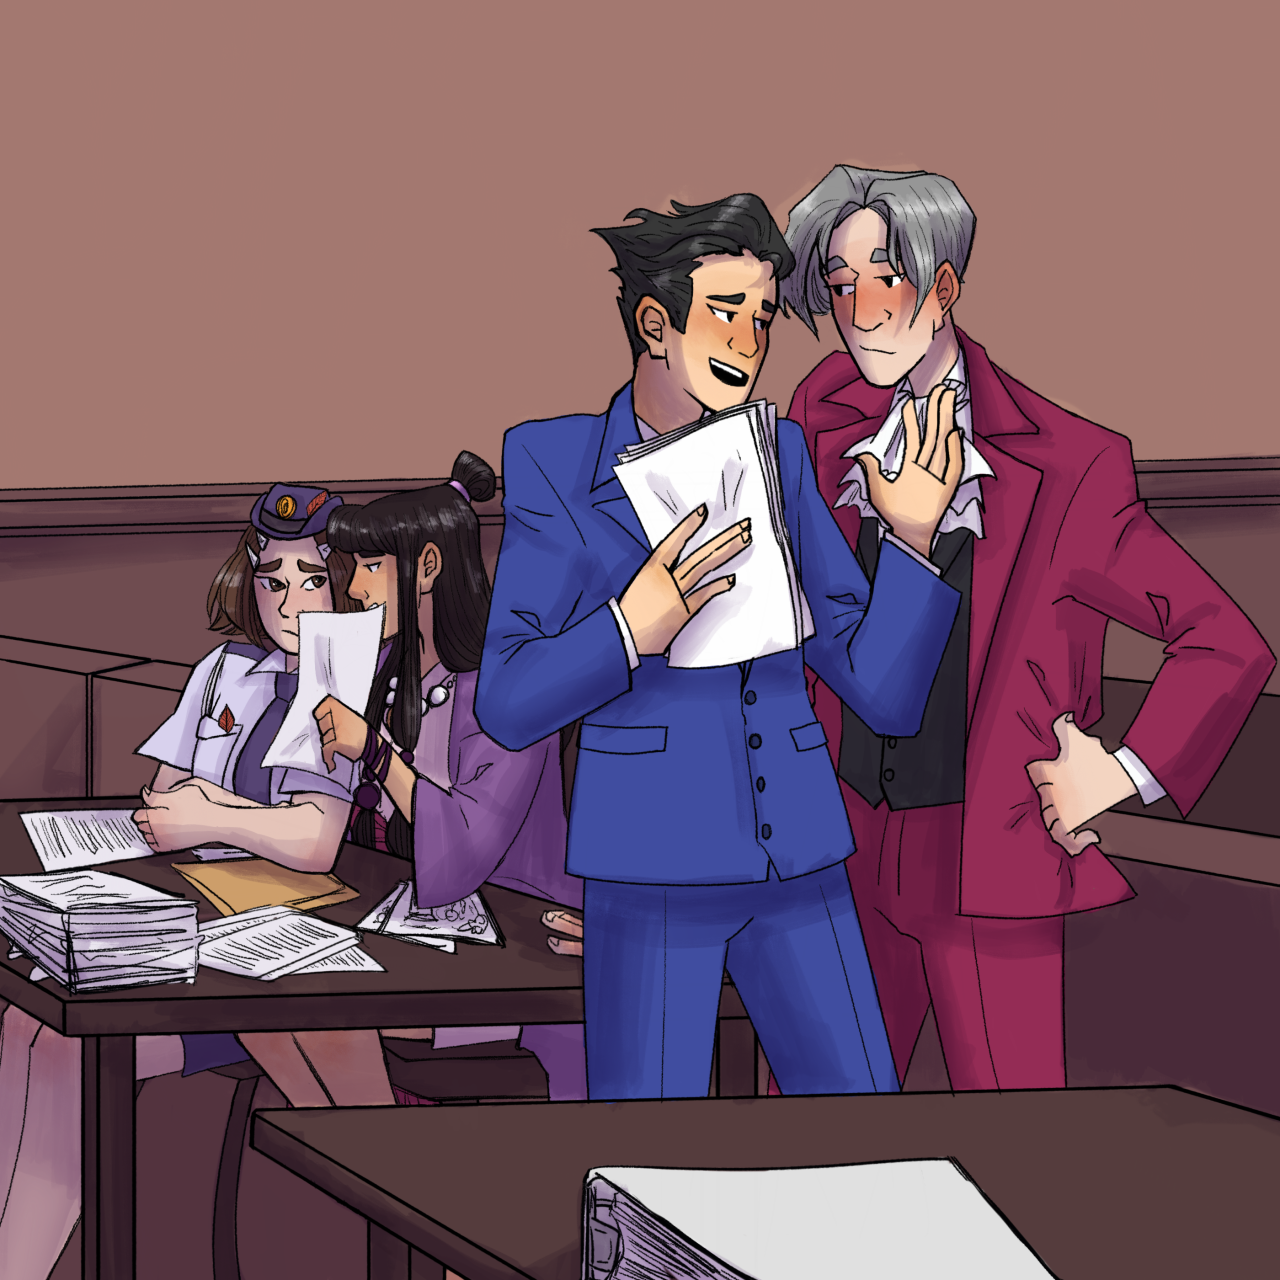 tali-zorahs:
“phoenix showing edgeworth some documents before introducing them into evidence
i’m just pretending the ace attorney legal system functions like the irl american system because that’s what i know
”